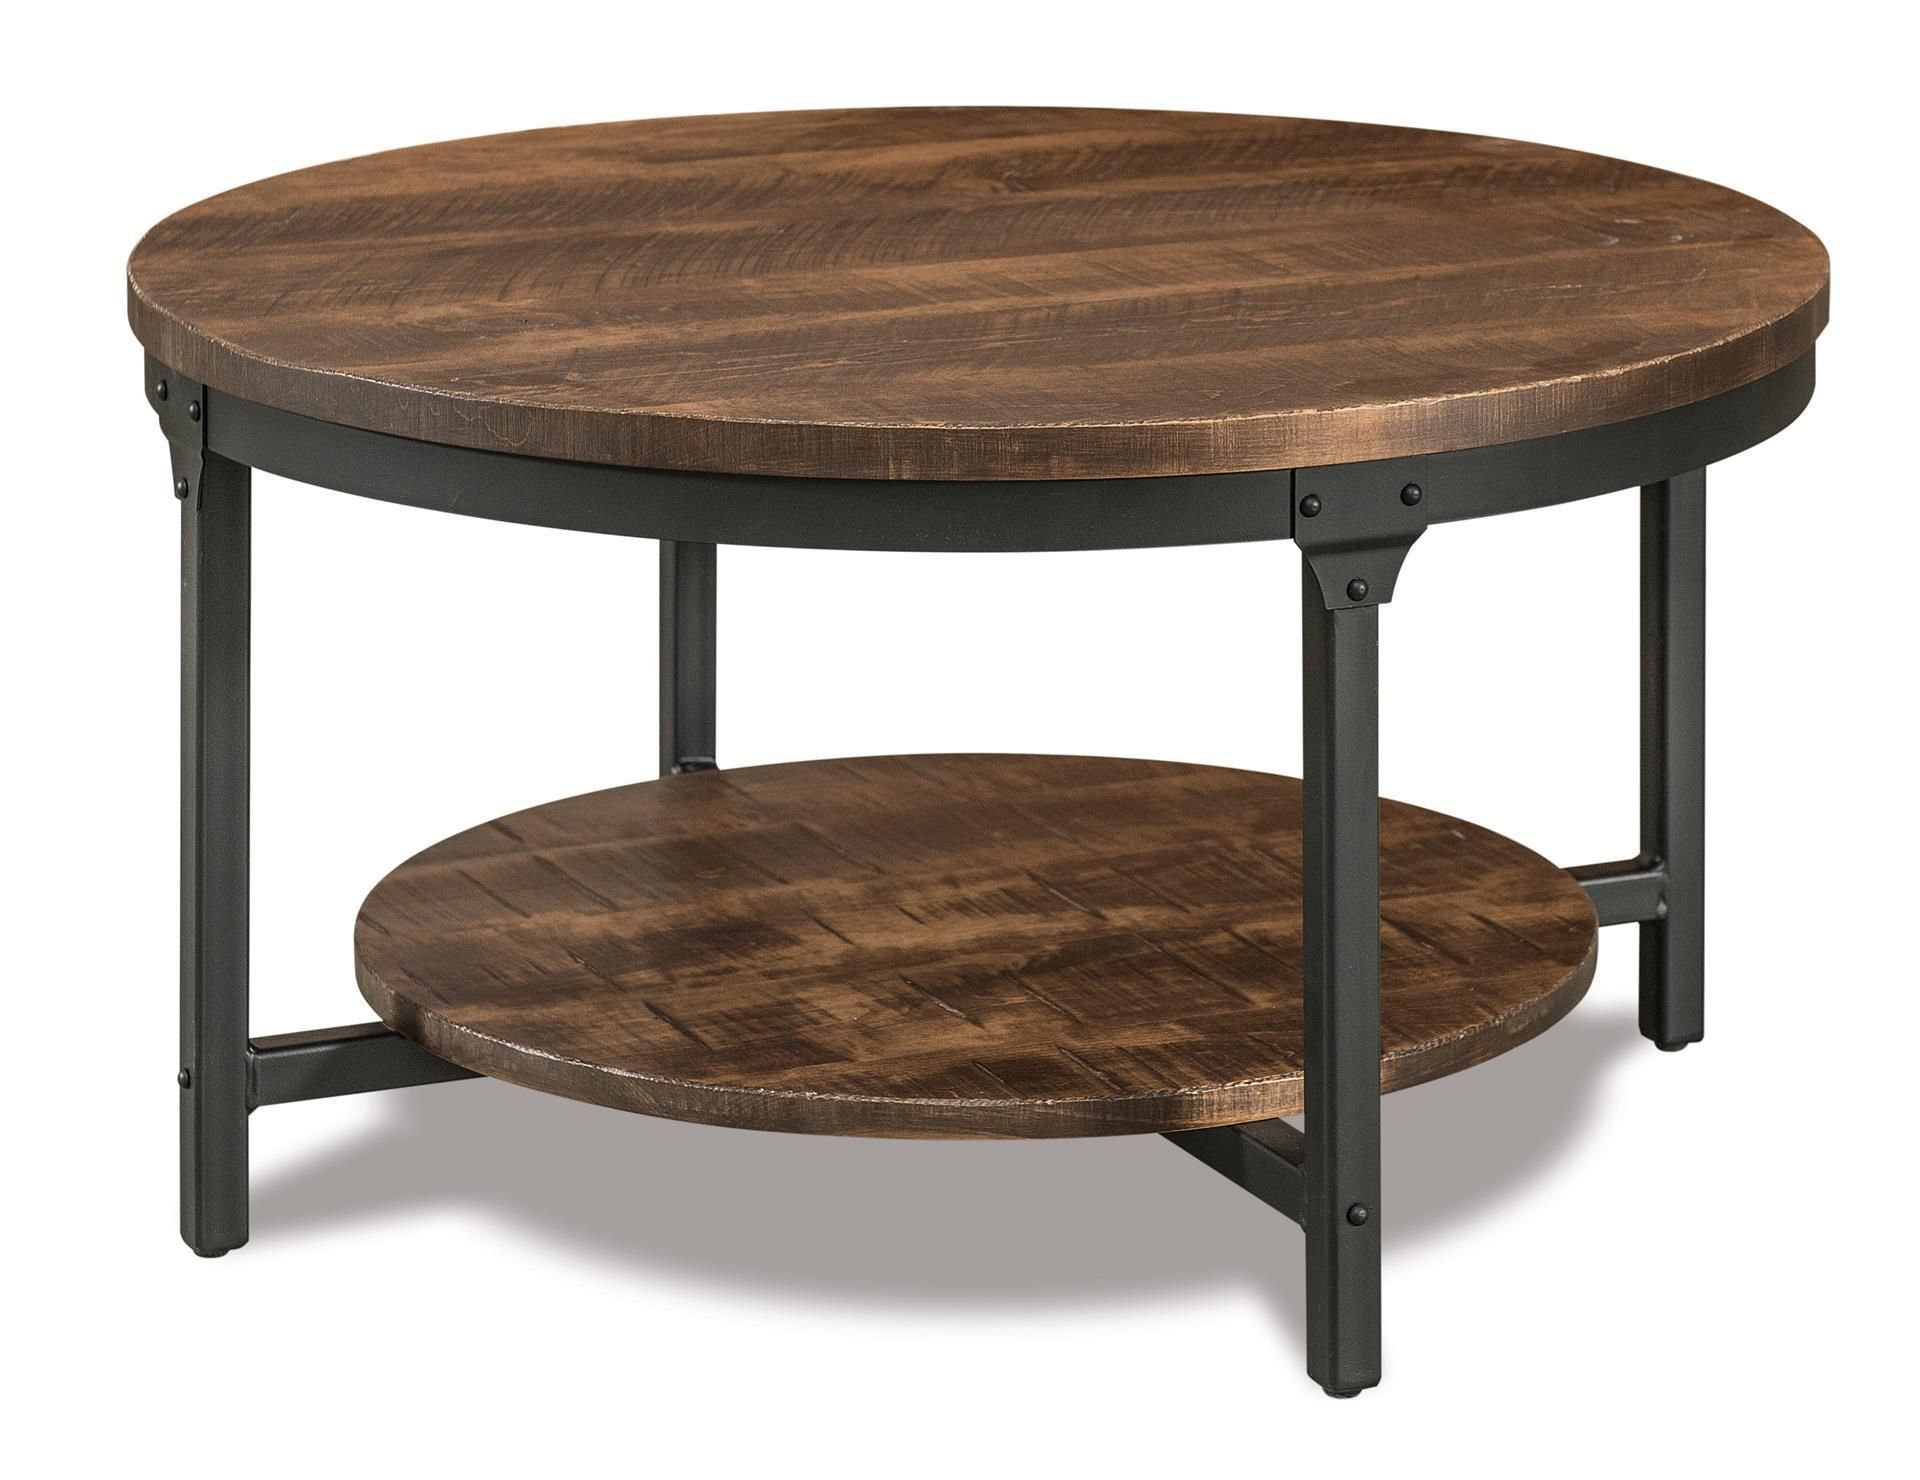 38" Round Rustic Coffee Table From Dutchcrafters Amish Furniture Pertaining To Coffee Tables With Round Wooden Tops (View 13 of 15)